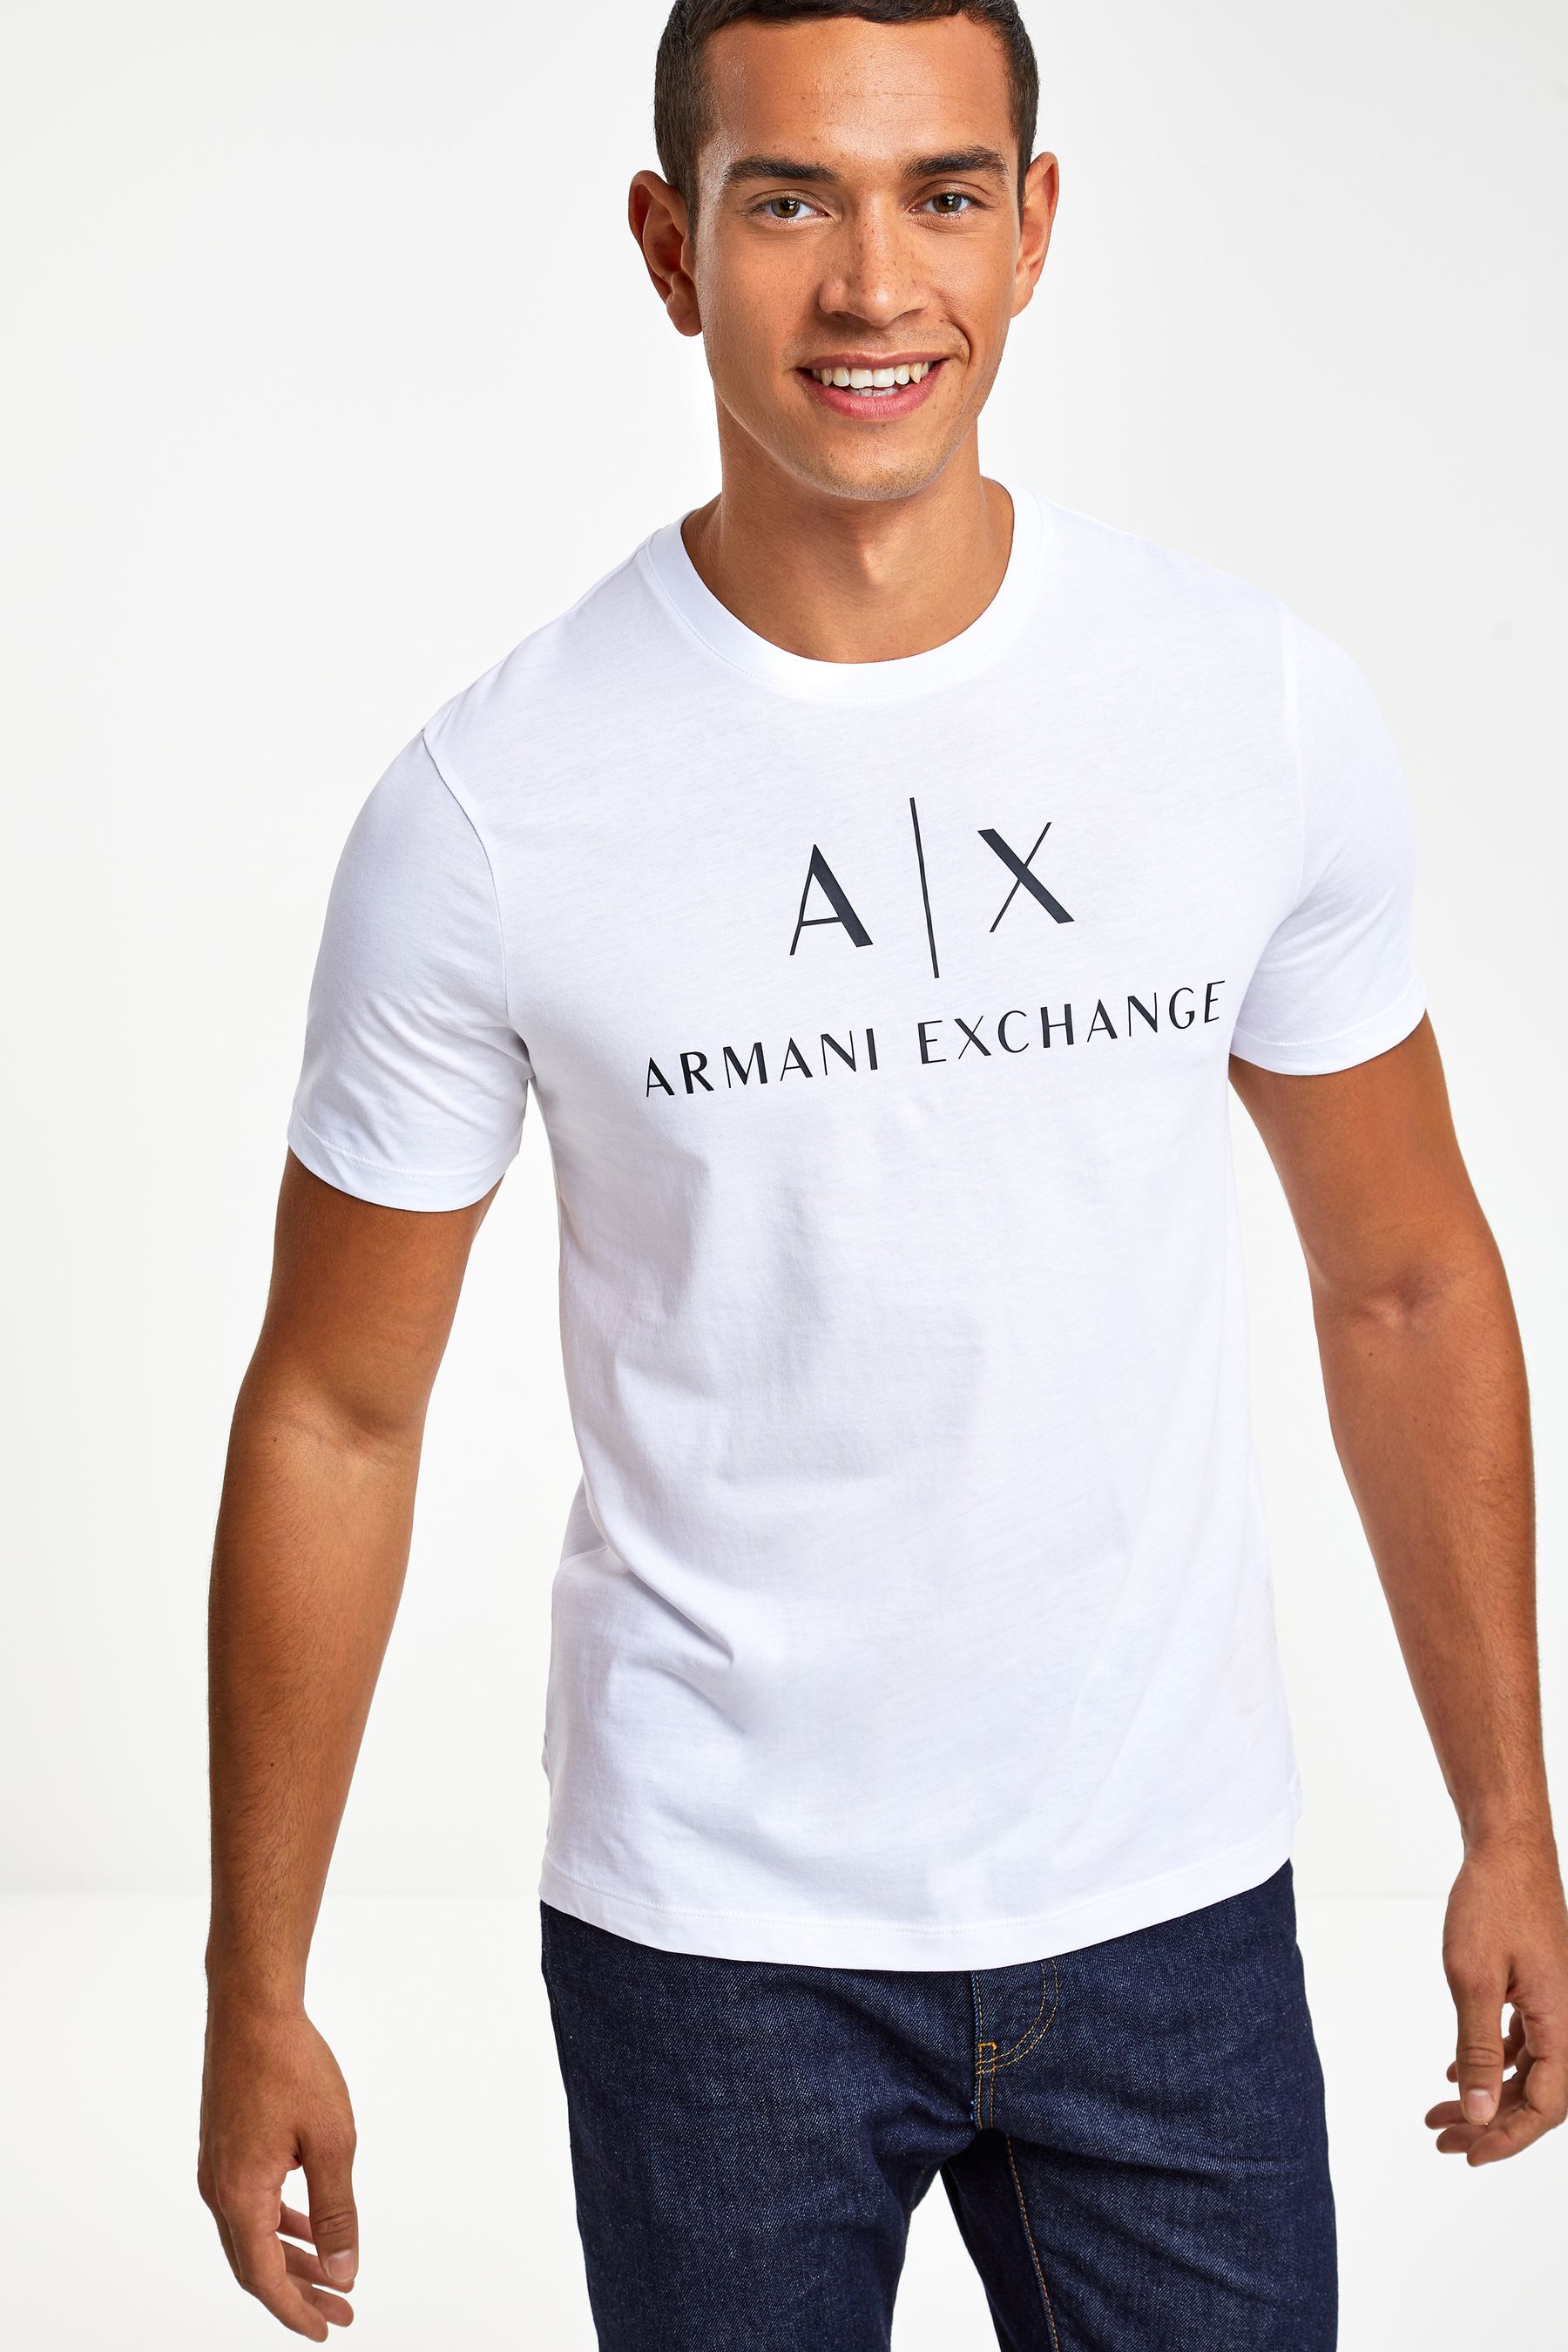 Buy Armani Exchange Logo T-Shirt from the Next UK online shop